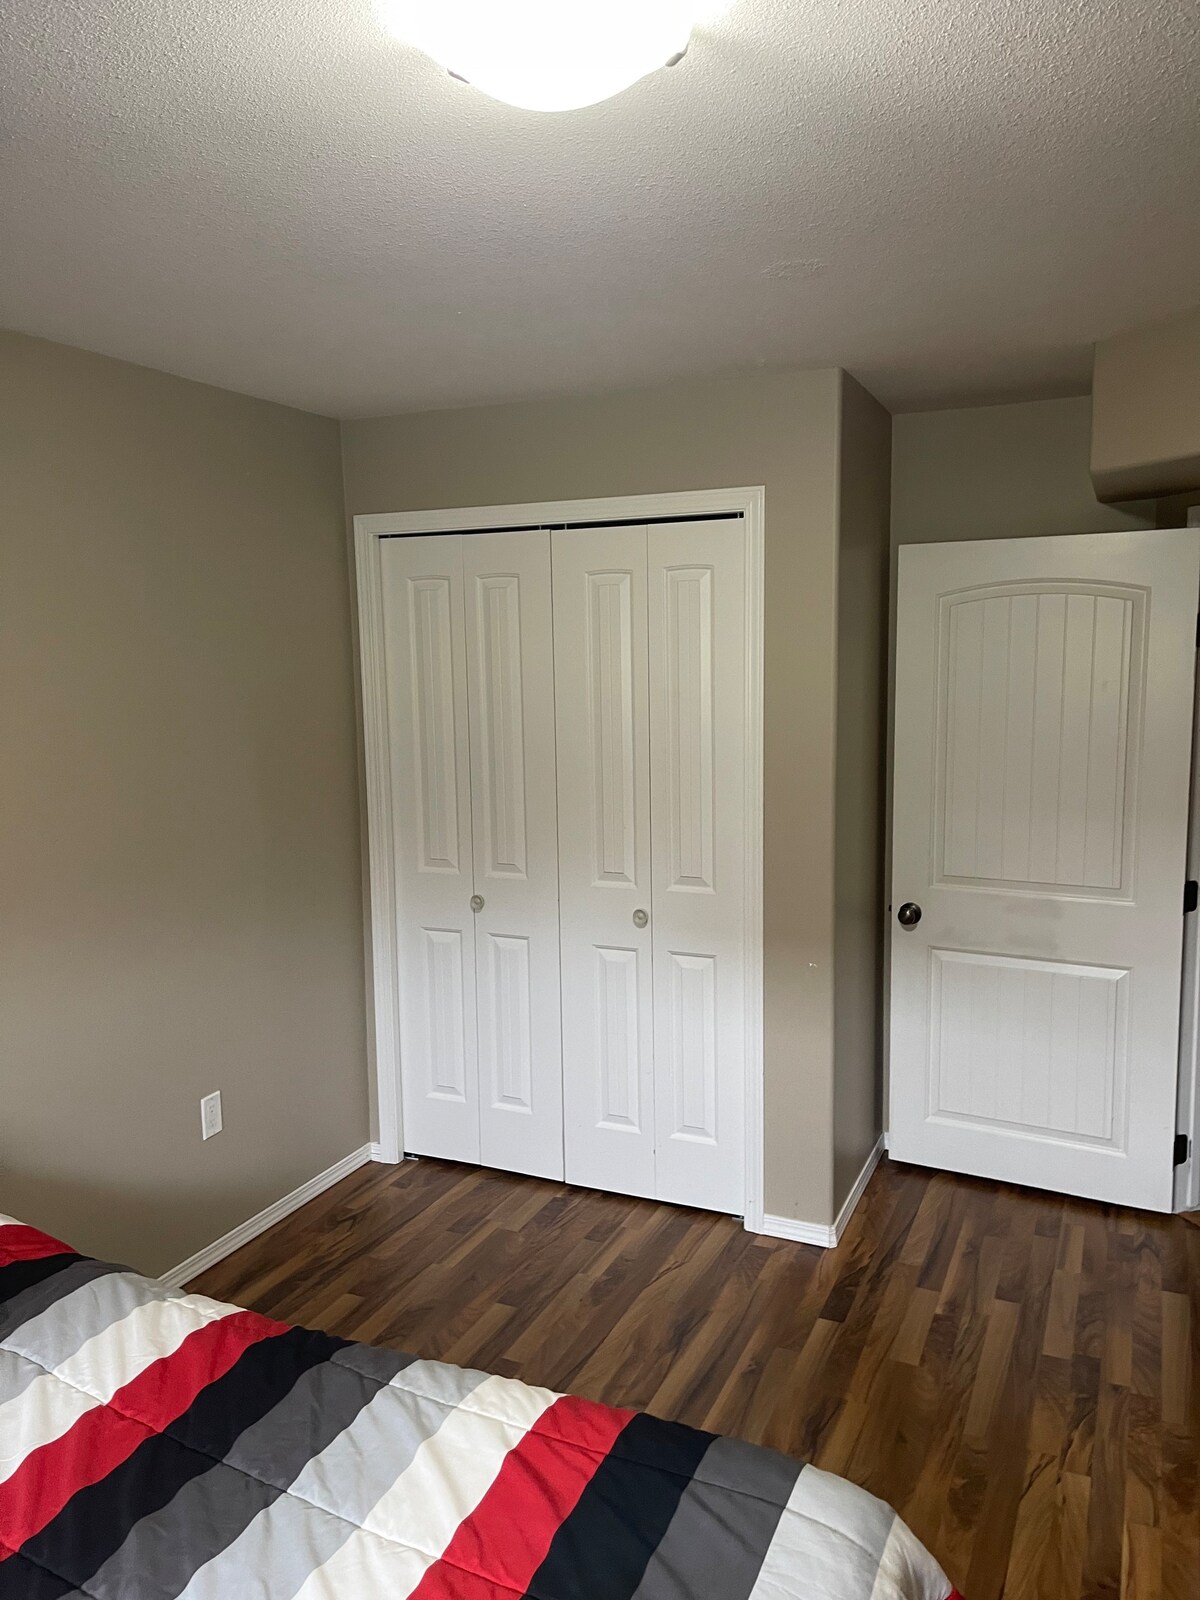 Basement suite with private entrance